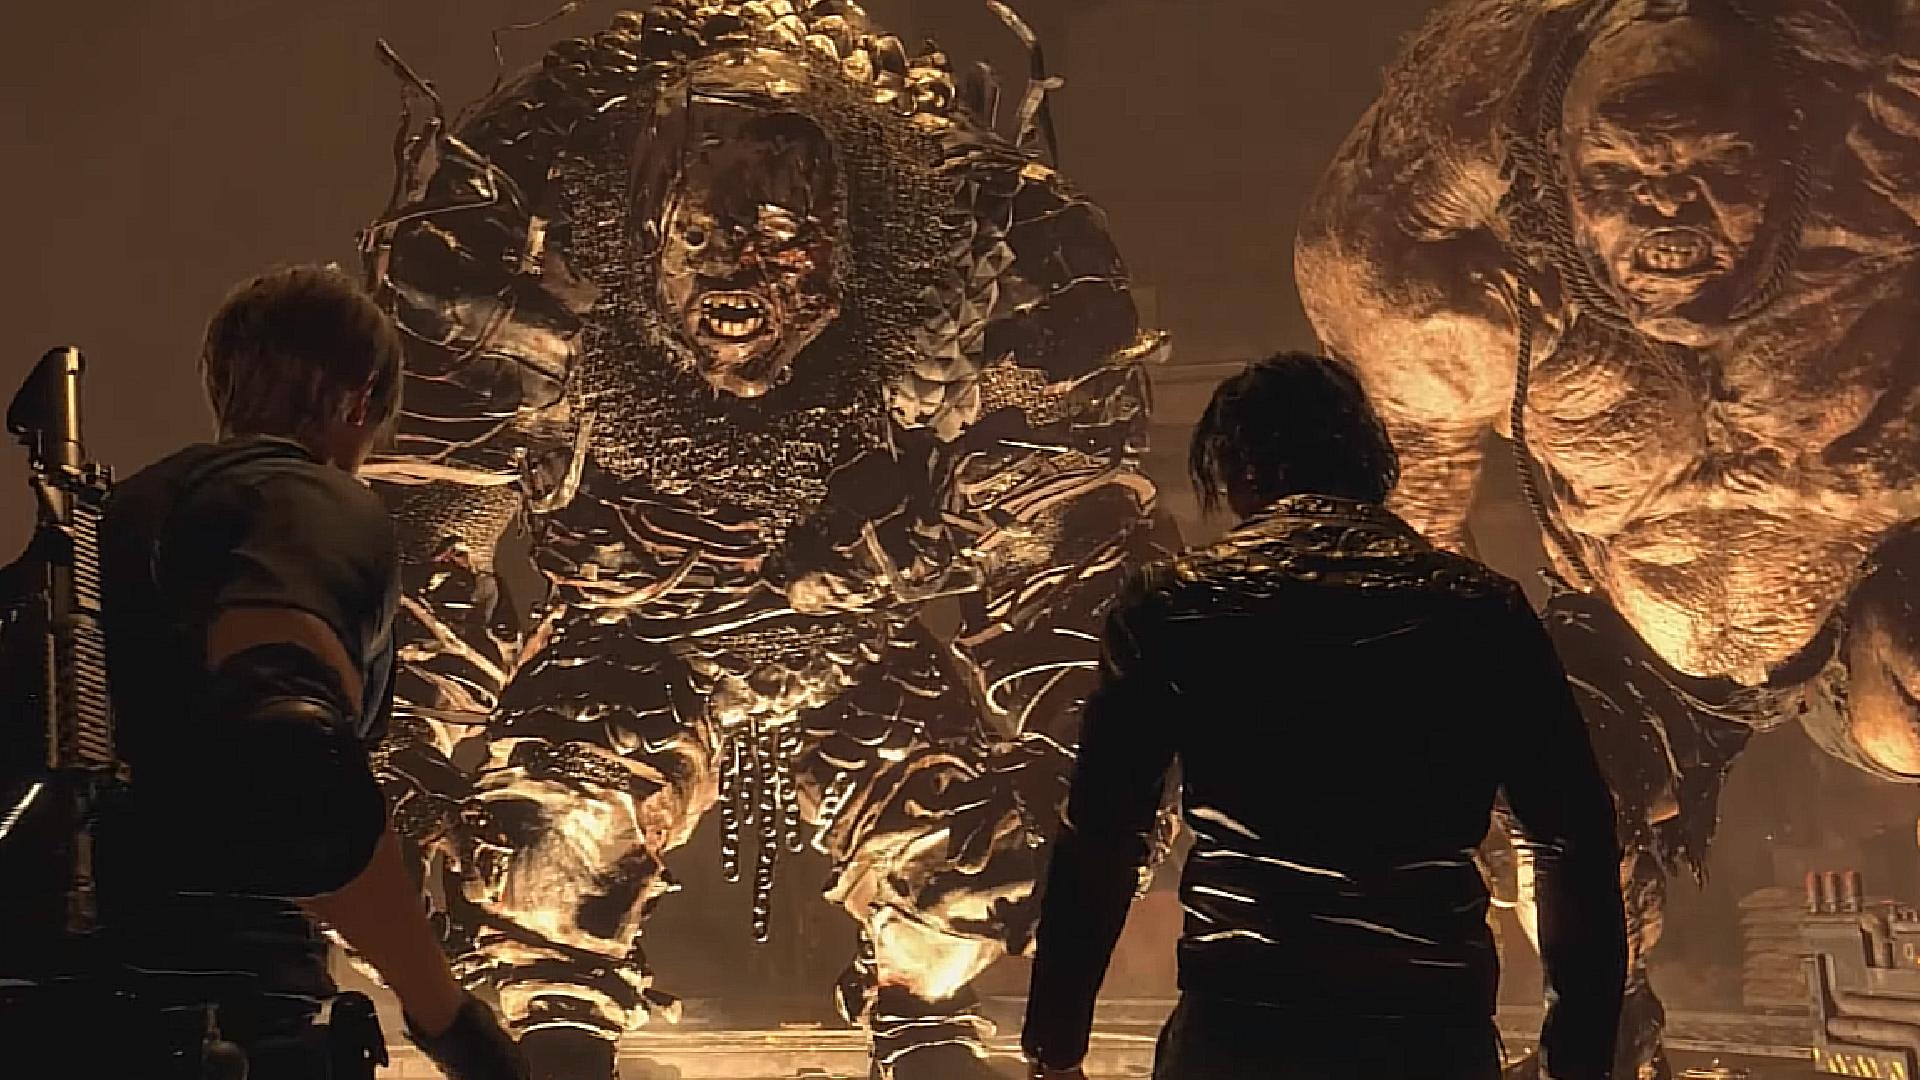 Resident Evil 4 Remake Bosses: The two El Gigantes can be seen